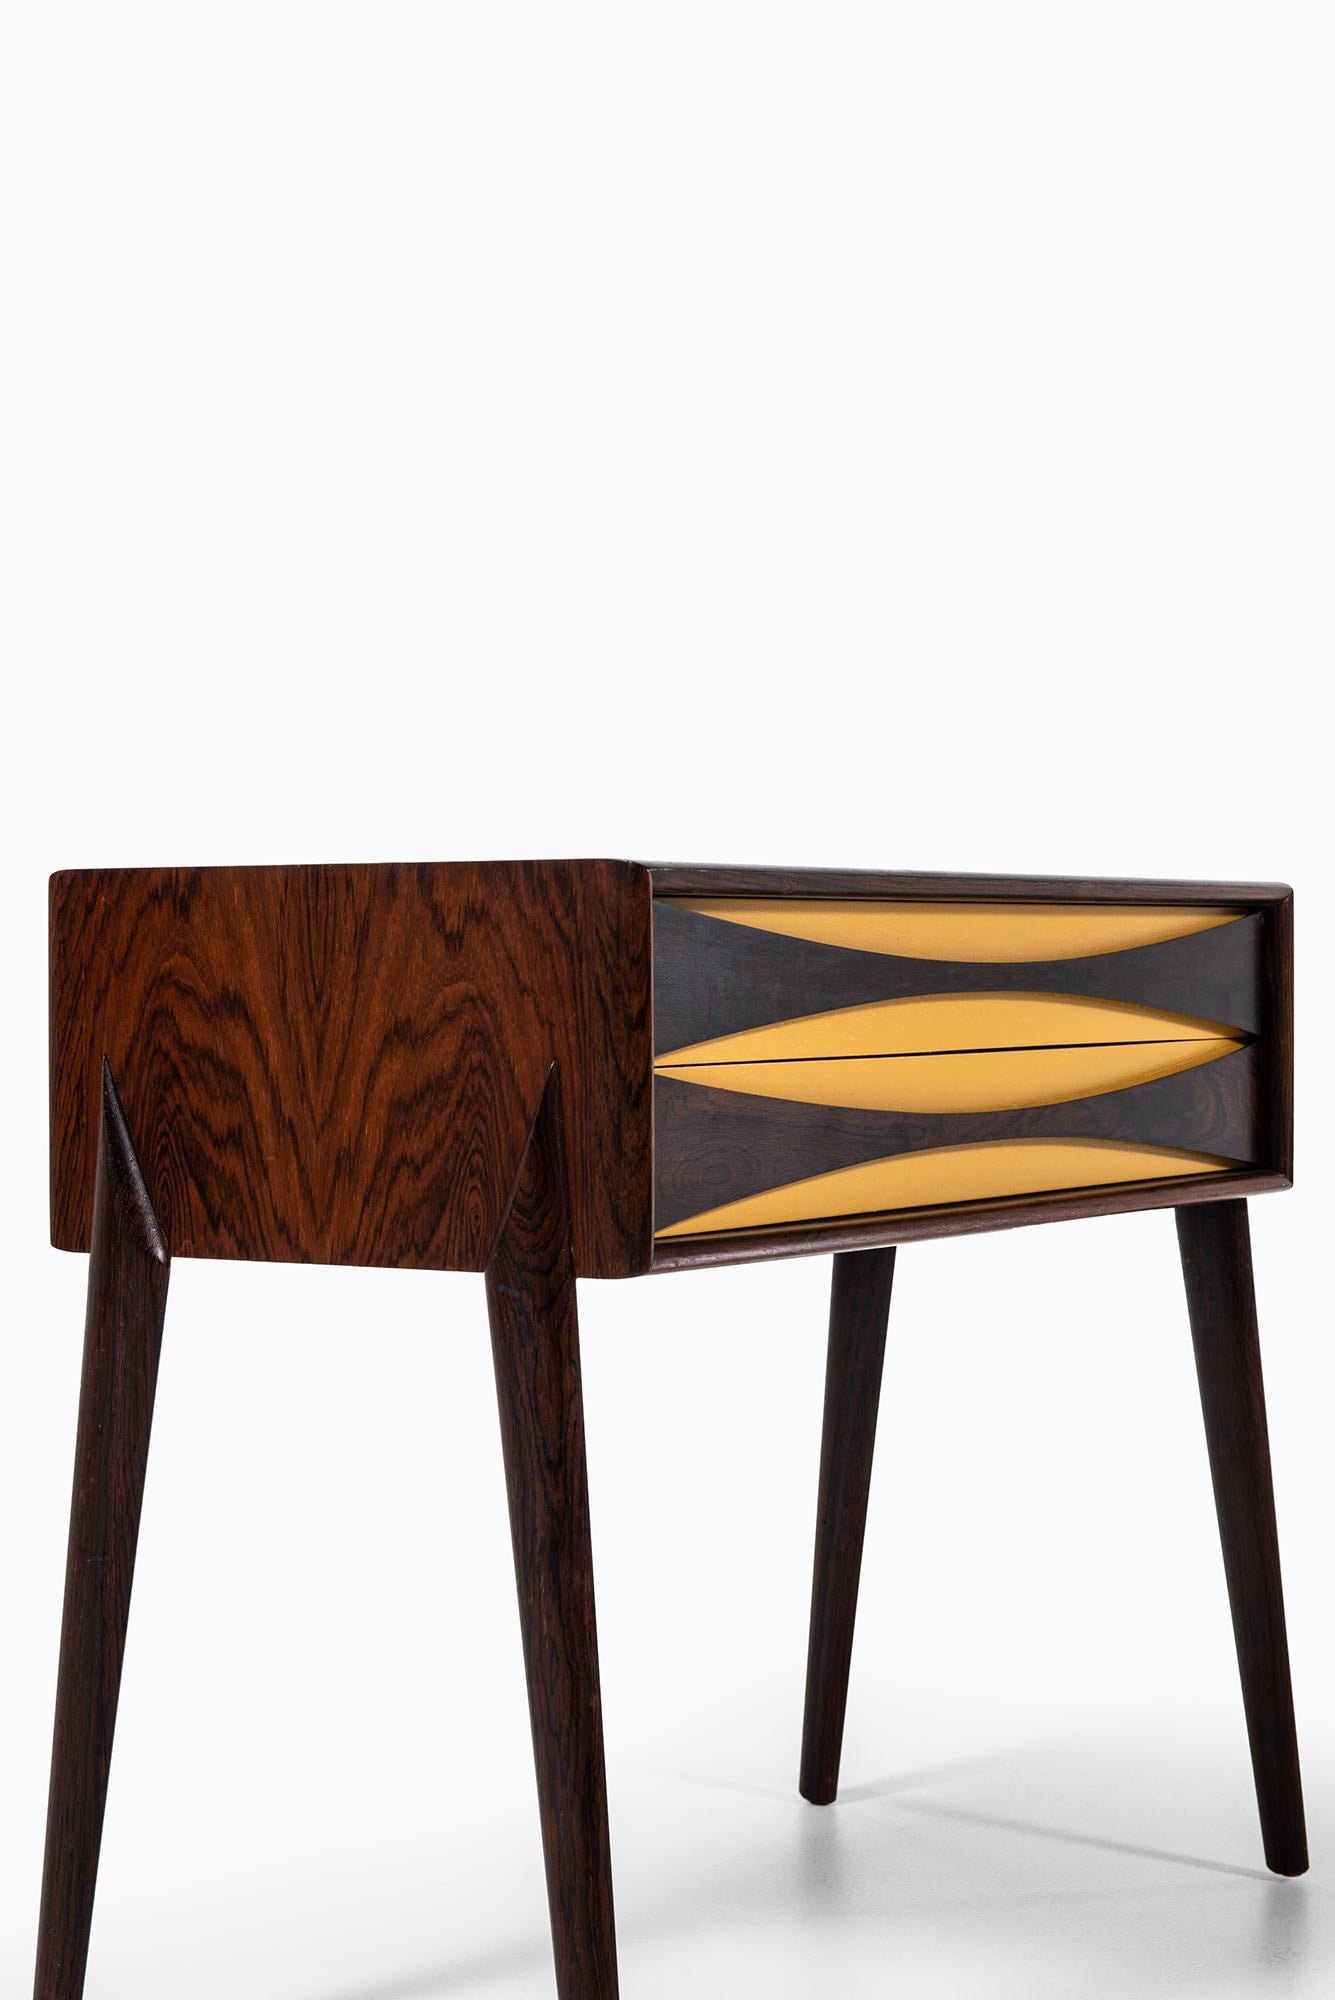 Mid-20th Century Rimbert Sandholt Side Tables in Rosewood by Glas & Trä Hovmantorp in Sweden 